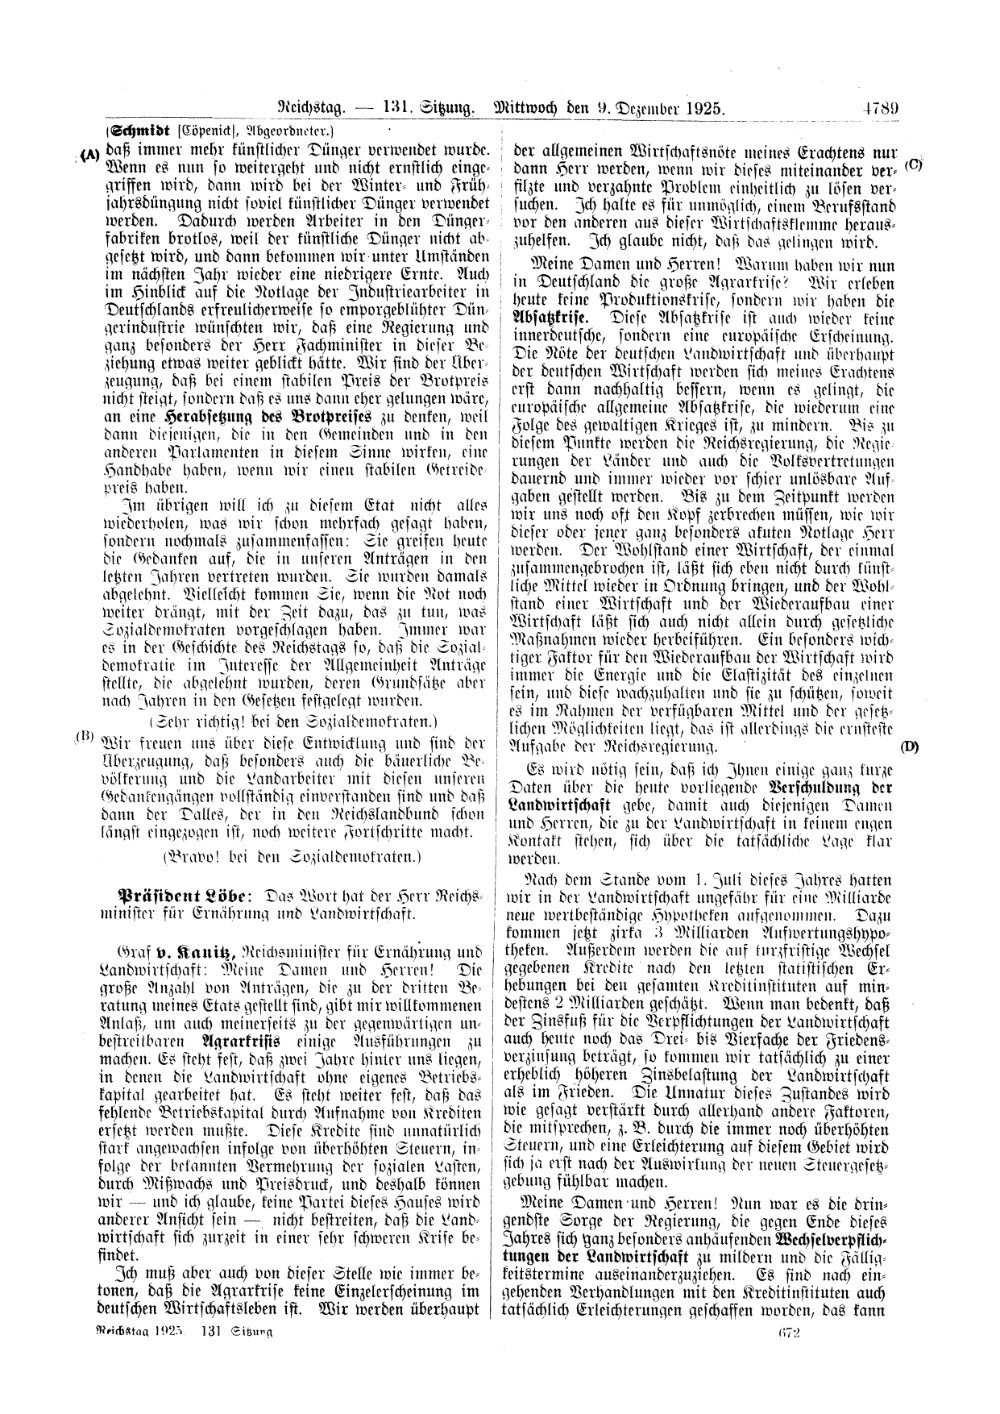 Scan of page 4789